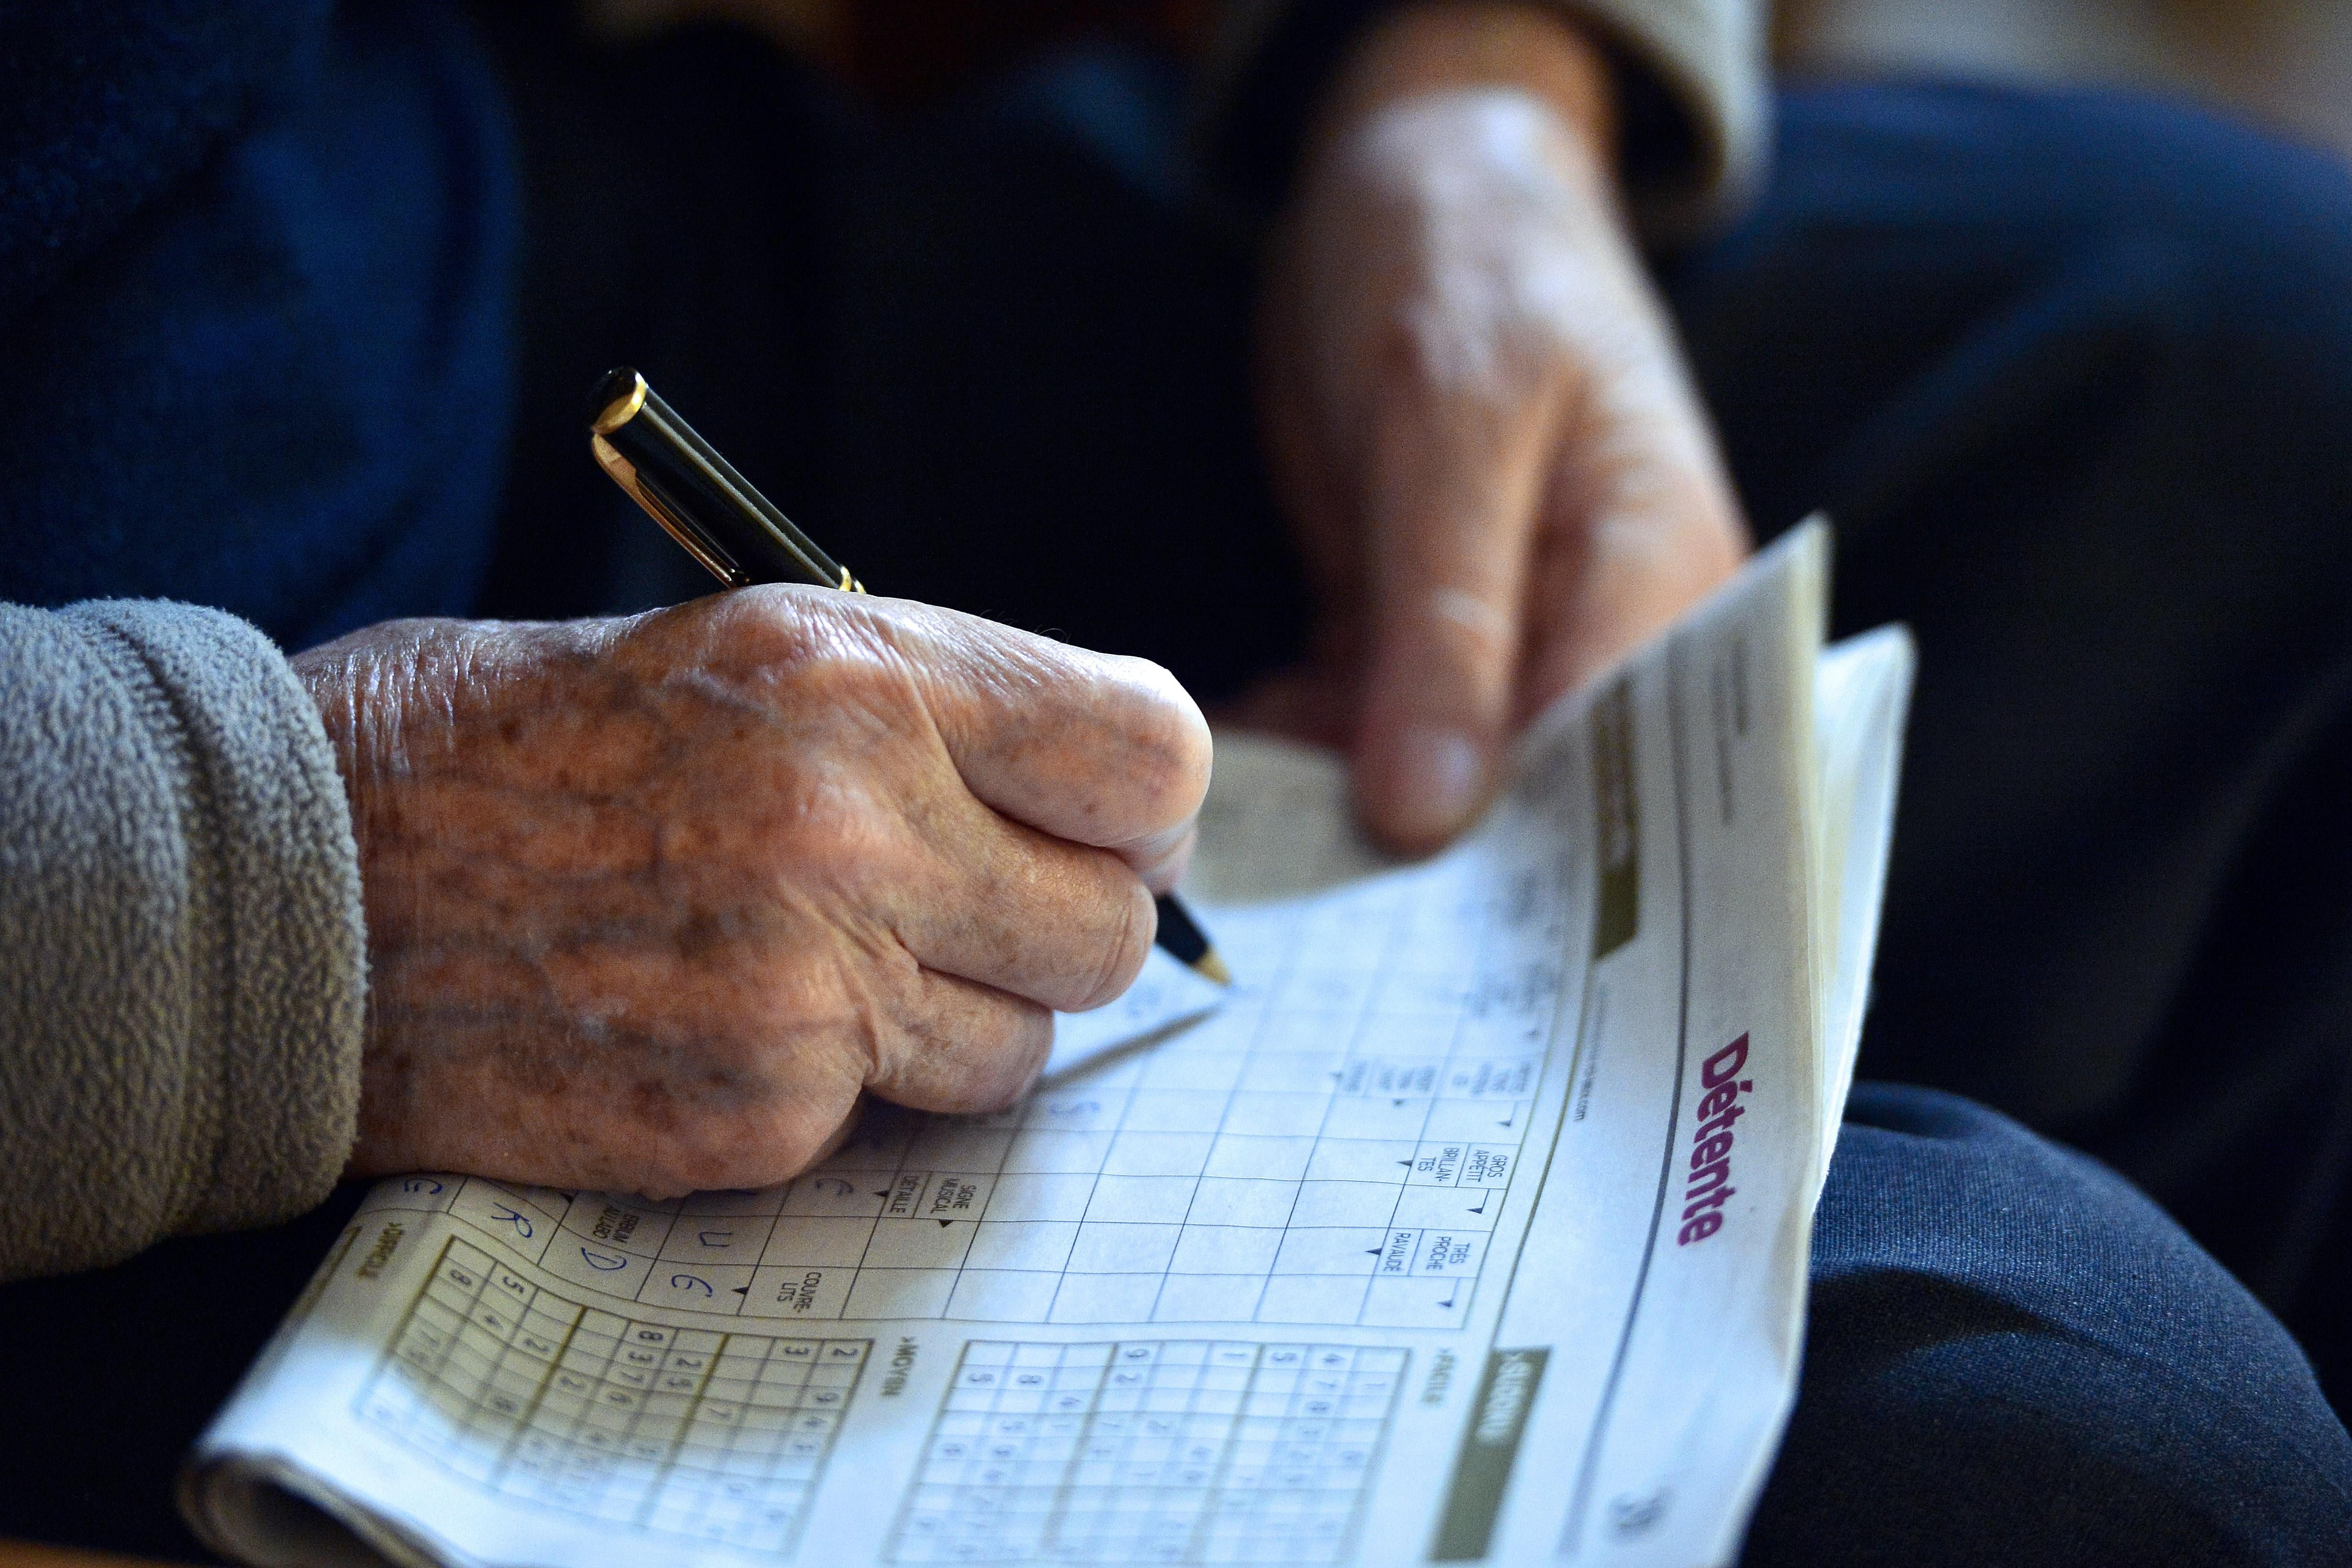 An elderly man fills in the crossword prior to Christmas eve dinner on December 24, 2014, at the St. Joseph retirement home in Nantes.